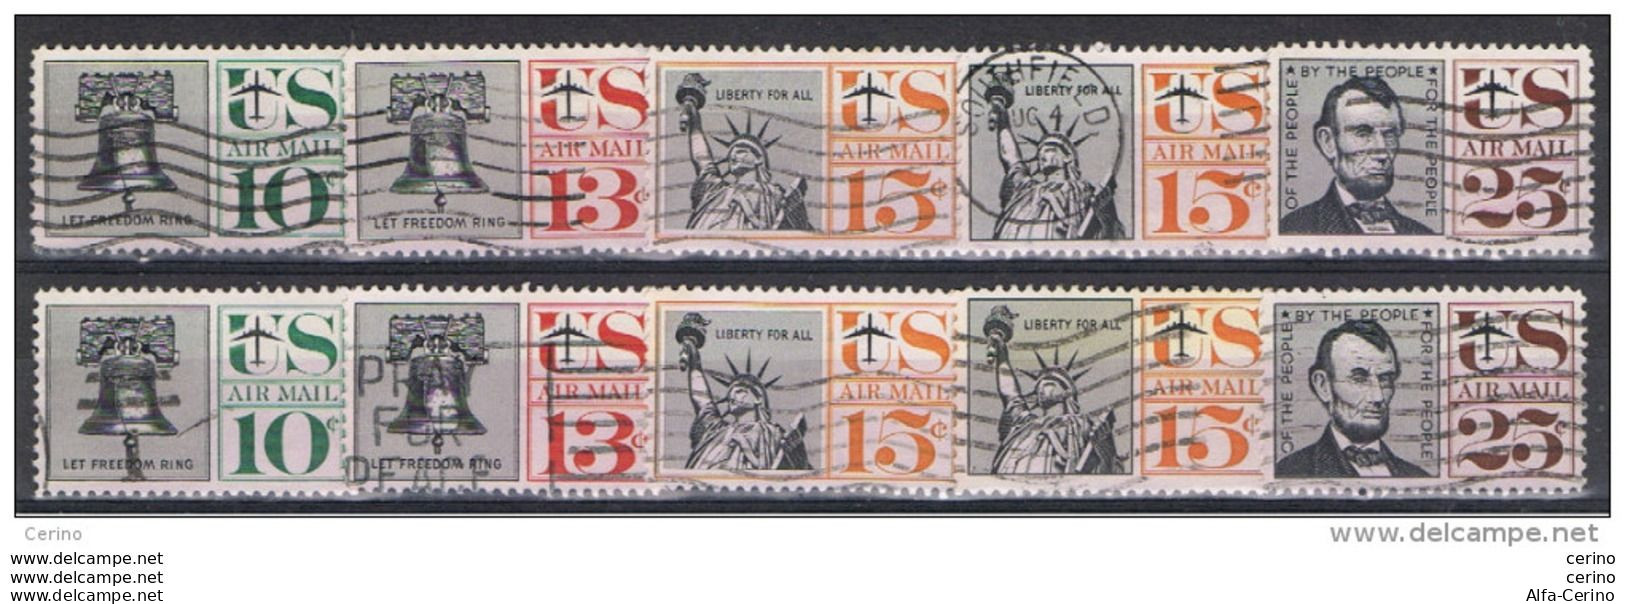 U.S.A.:  1959/61  AIR  MAIL  -  KOMPLET  SET  5  USED  STAMPS  -  REP.  2  EXEMPLARY  -  YV/TELL. 56/60 - 2a. 1941-1960 Gebraucht